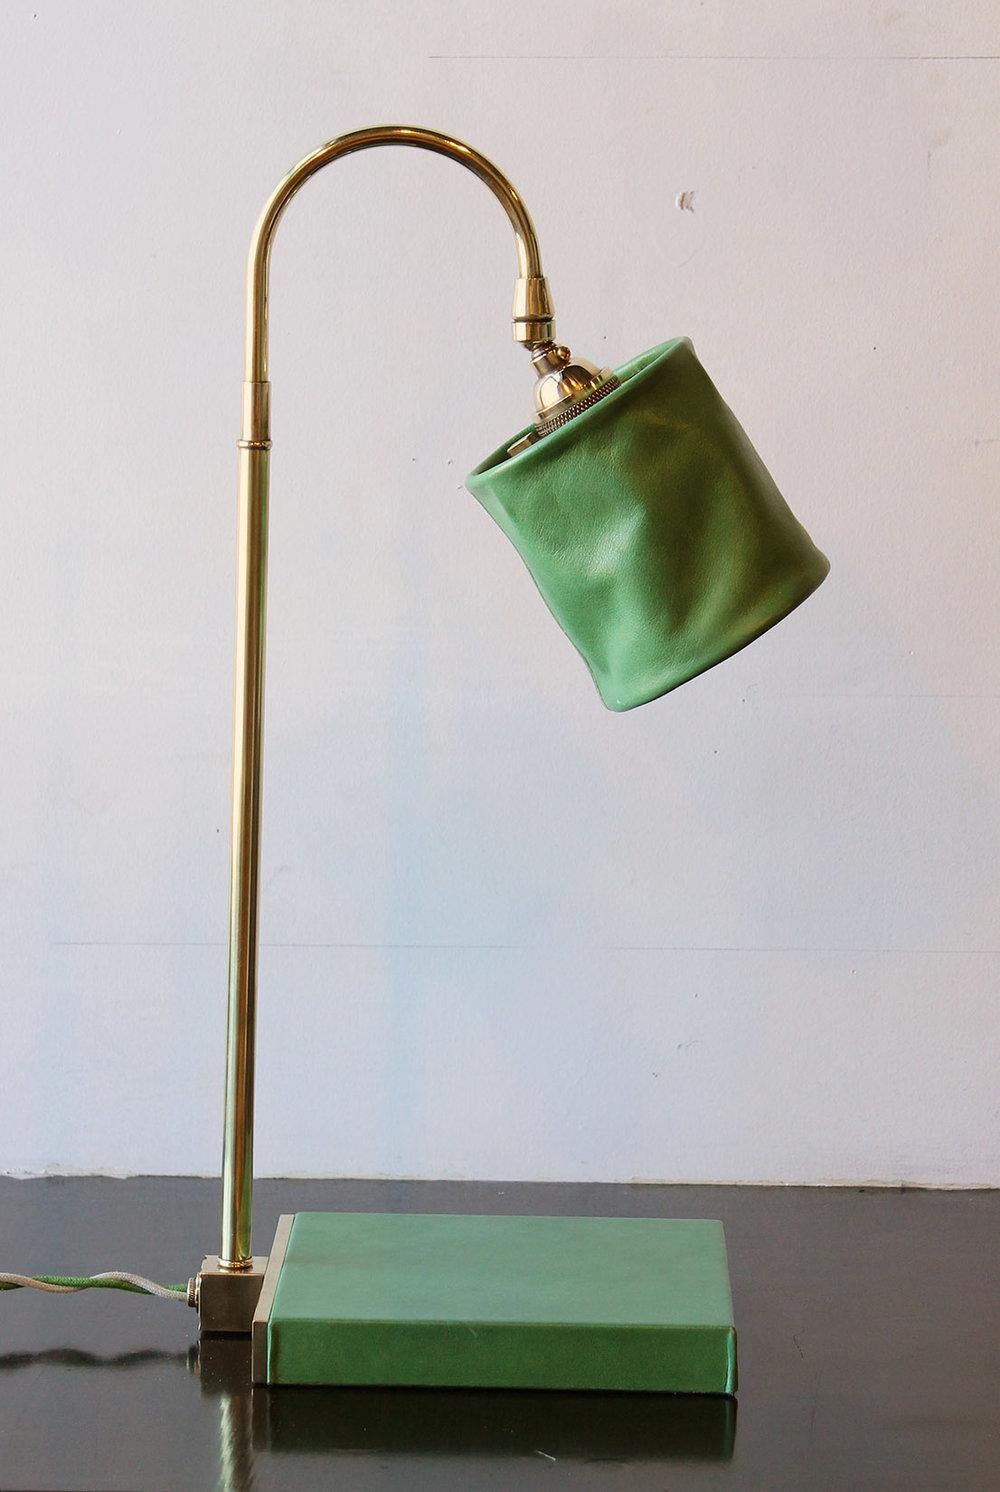 Series01 Desk Lamp, Hand-Dyed Ash 'Gray' Leather, Polished Unlacquered Brass For Sale 6